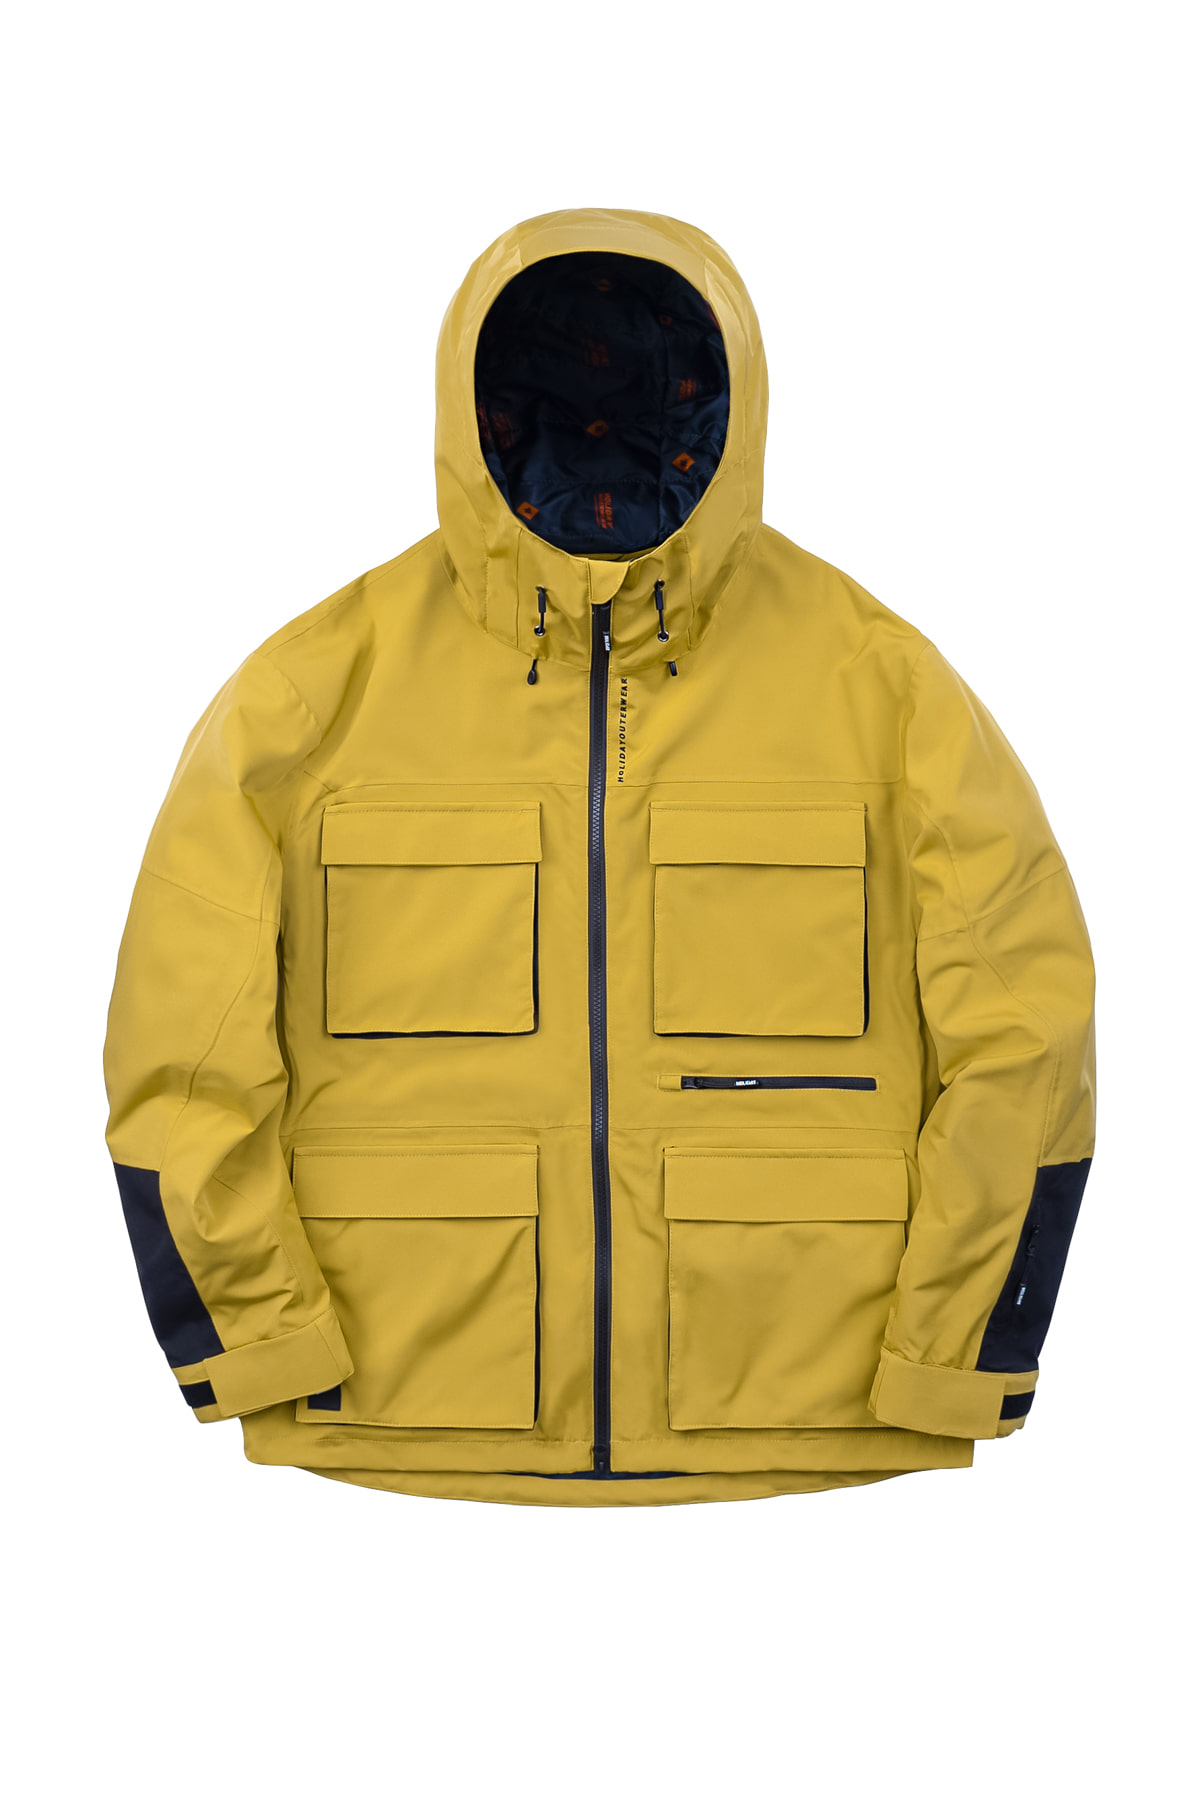 TAC 2L JACKET[2layer]-HONEY GOLDHOLIDAY OUTERWEAR